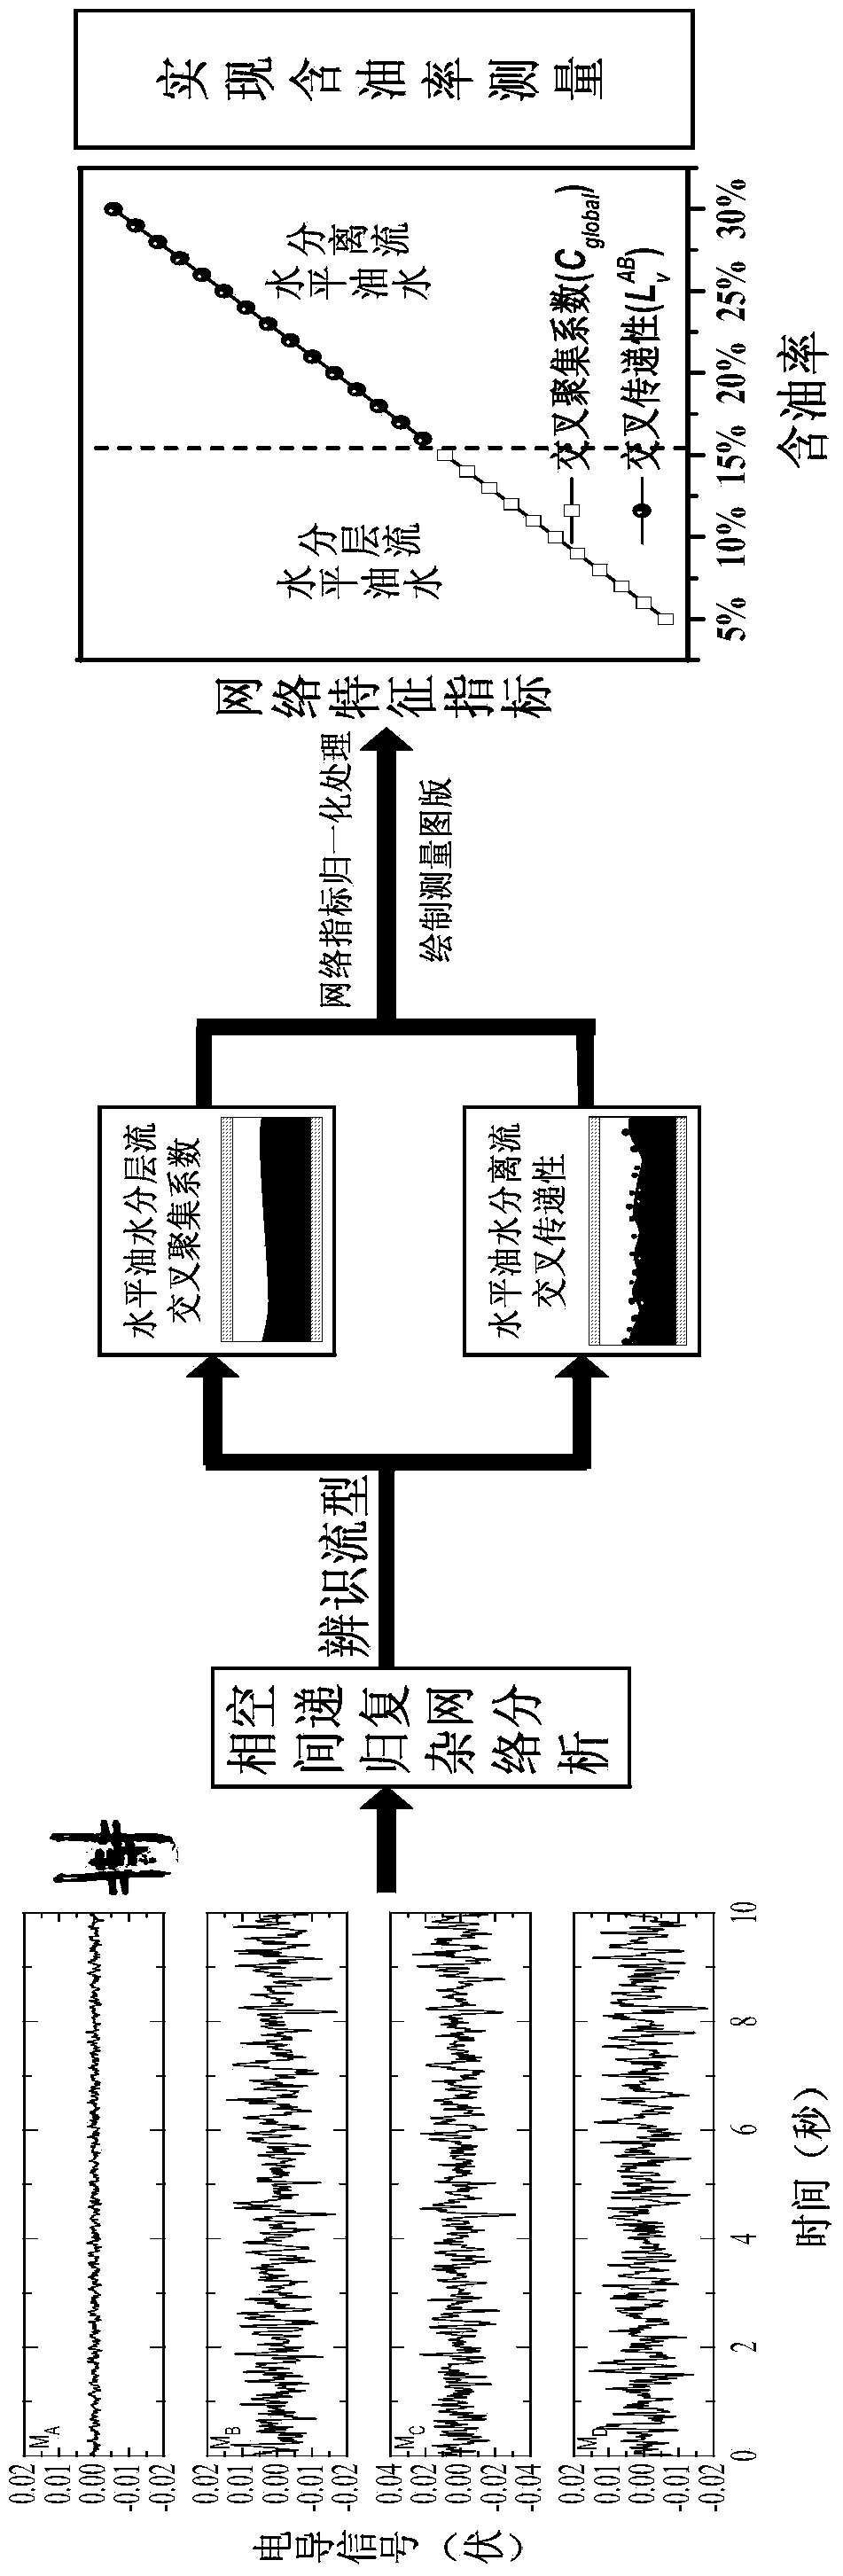 Oil-water phase content measurement method based on multivariate phase space complex network and verification method thereof